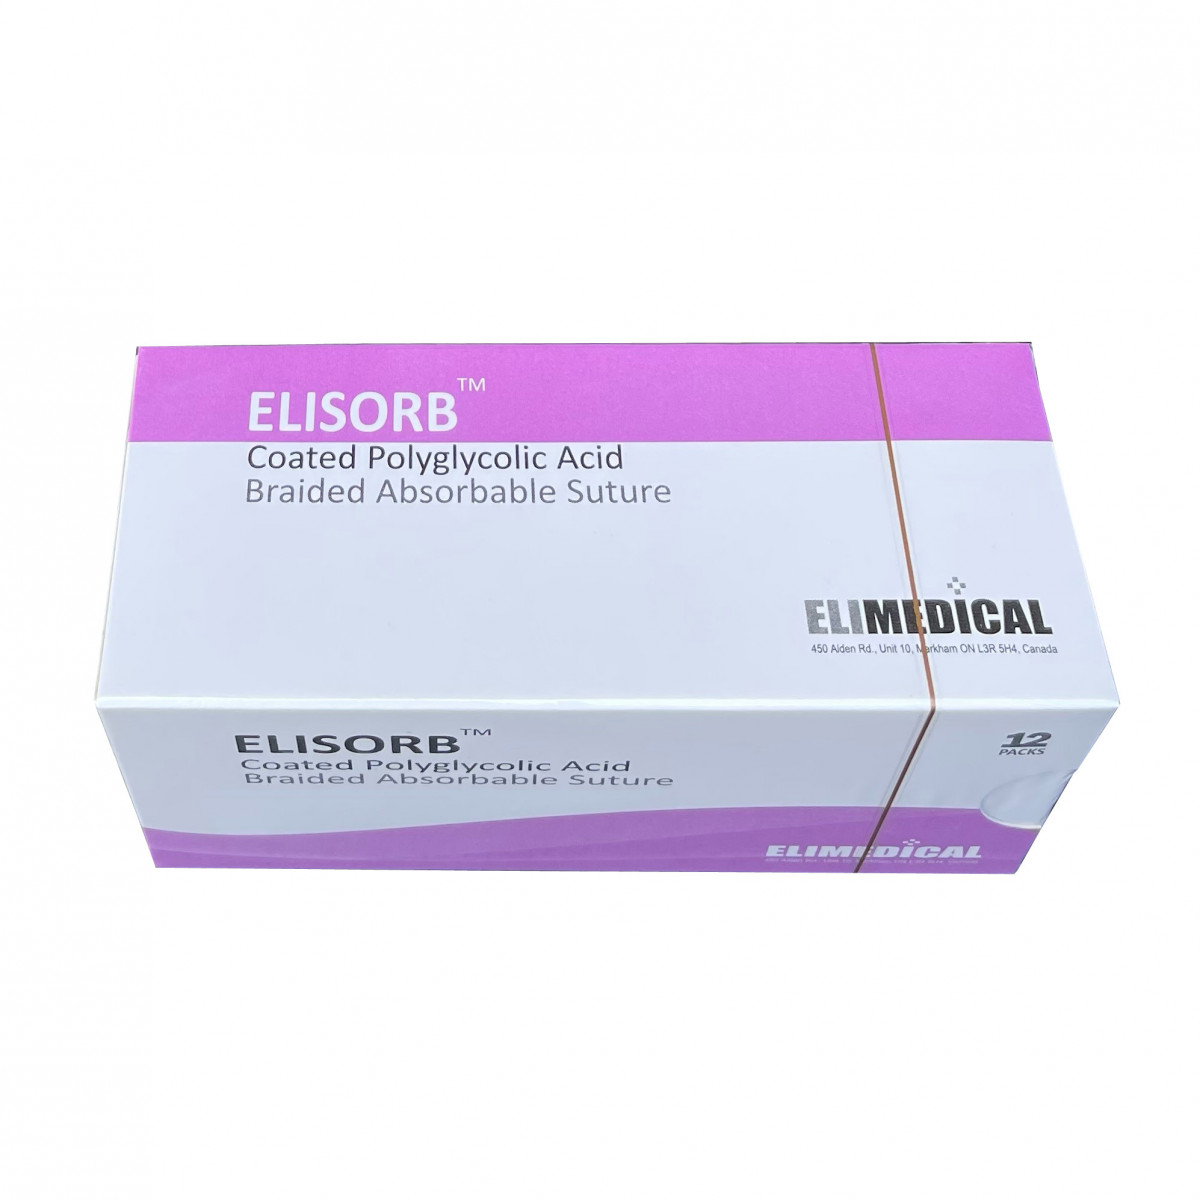 ELISORB Multifilament PGA Absorbable Sutures